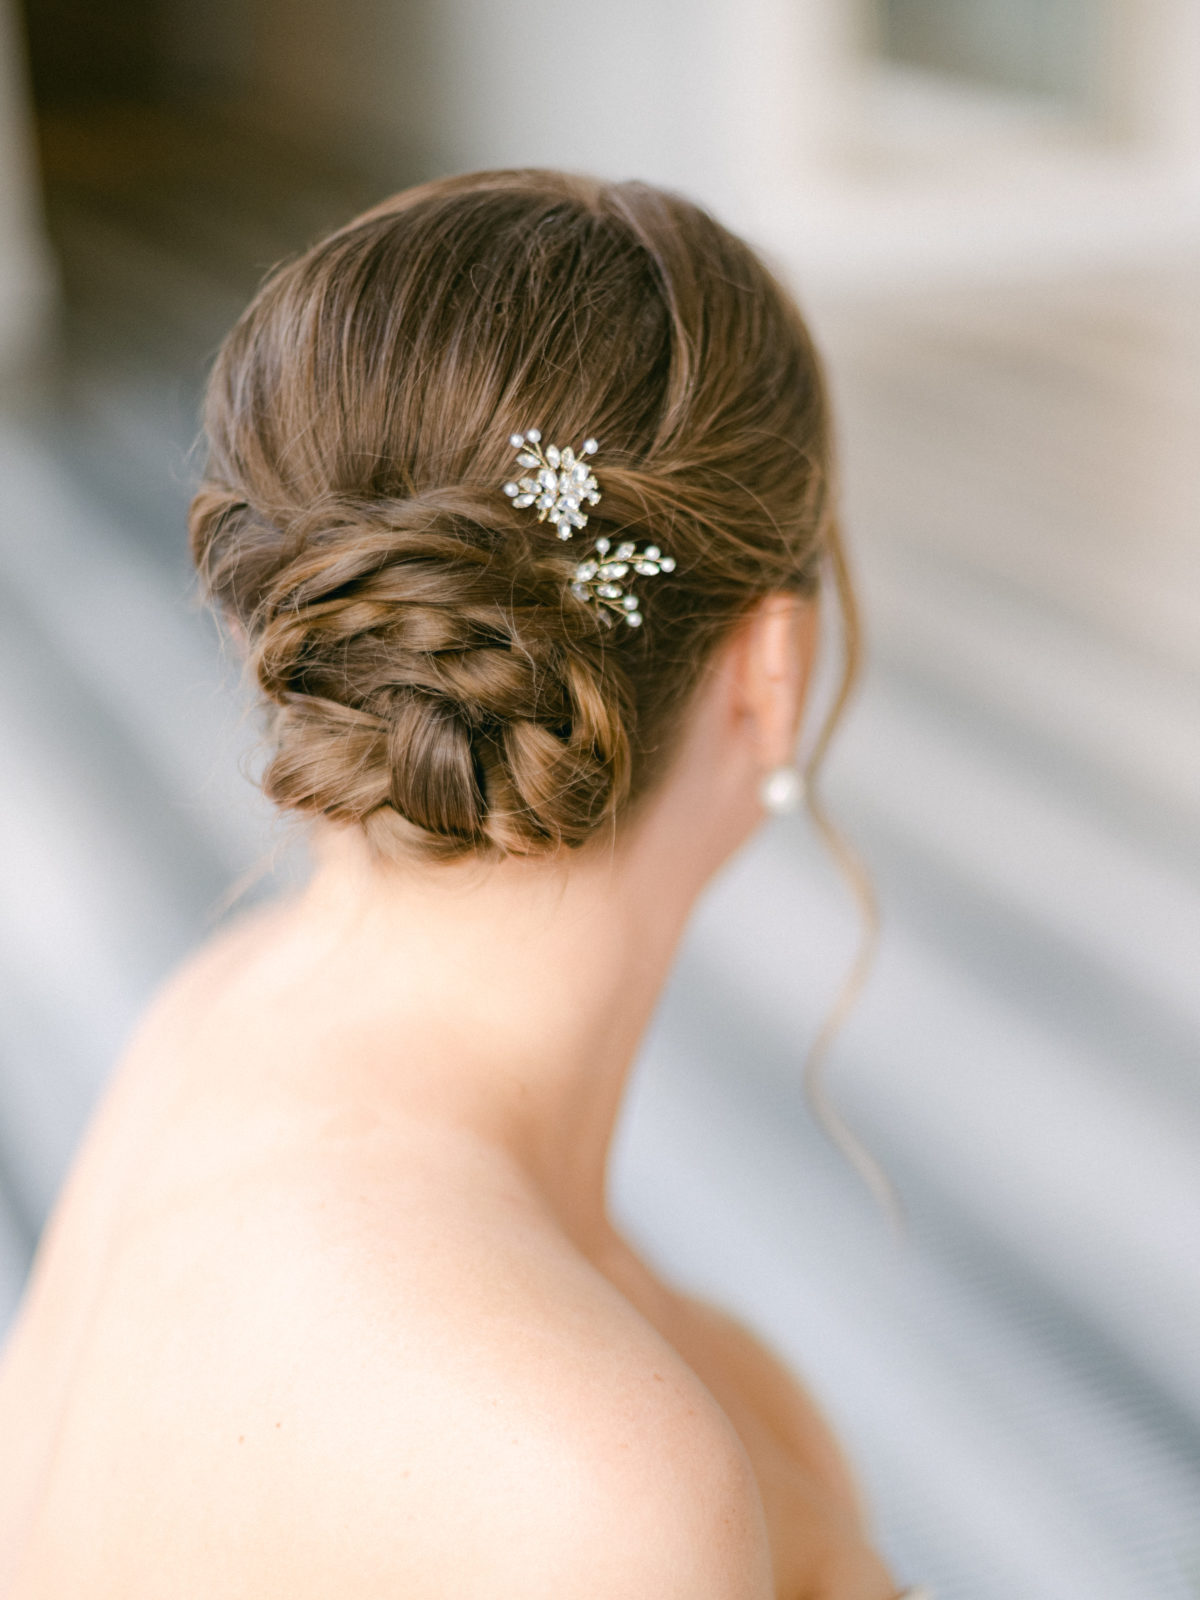 Bridal Hairstyle Updo with pins